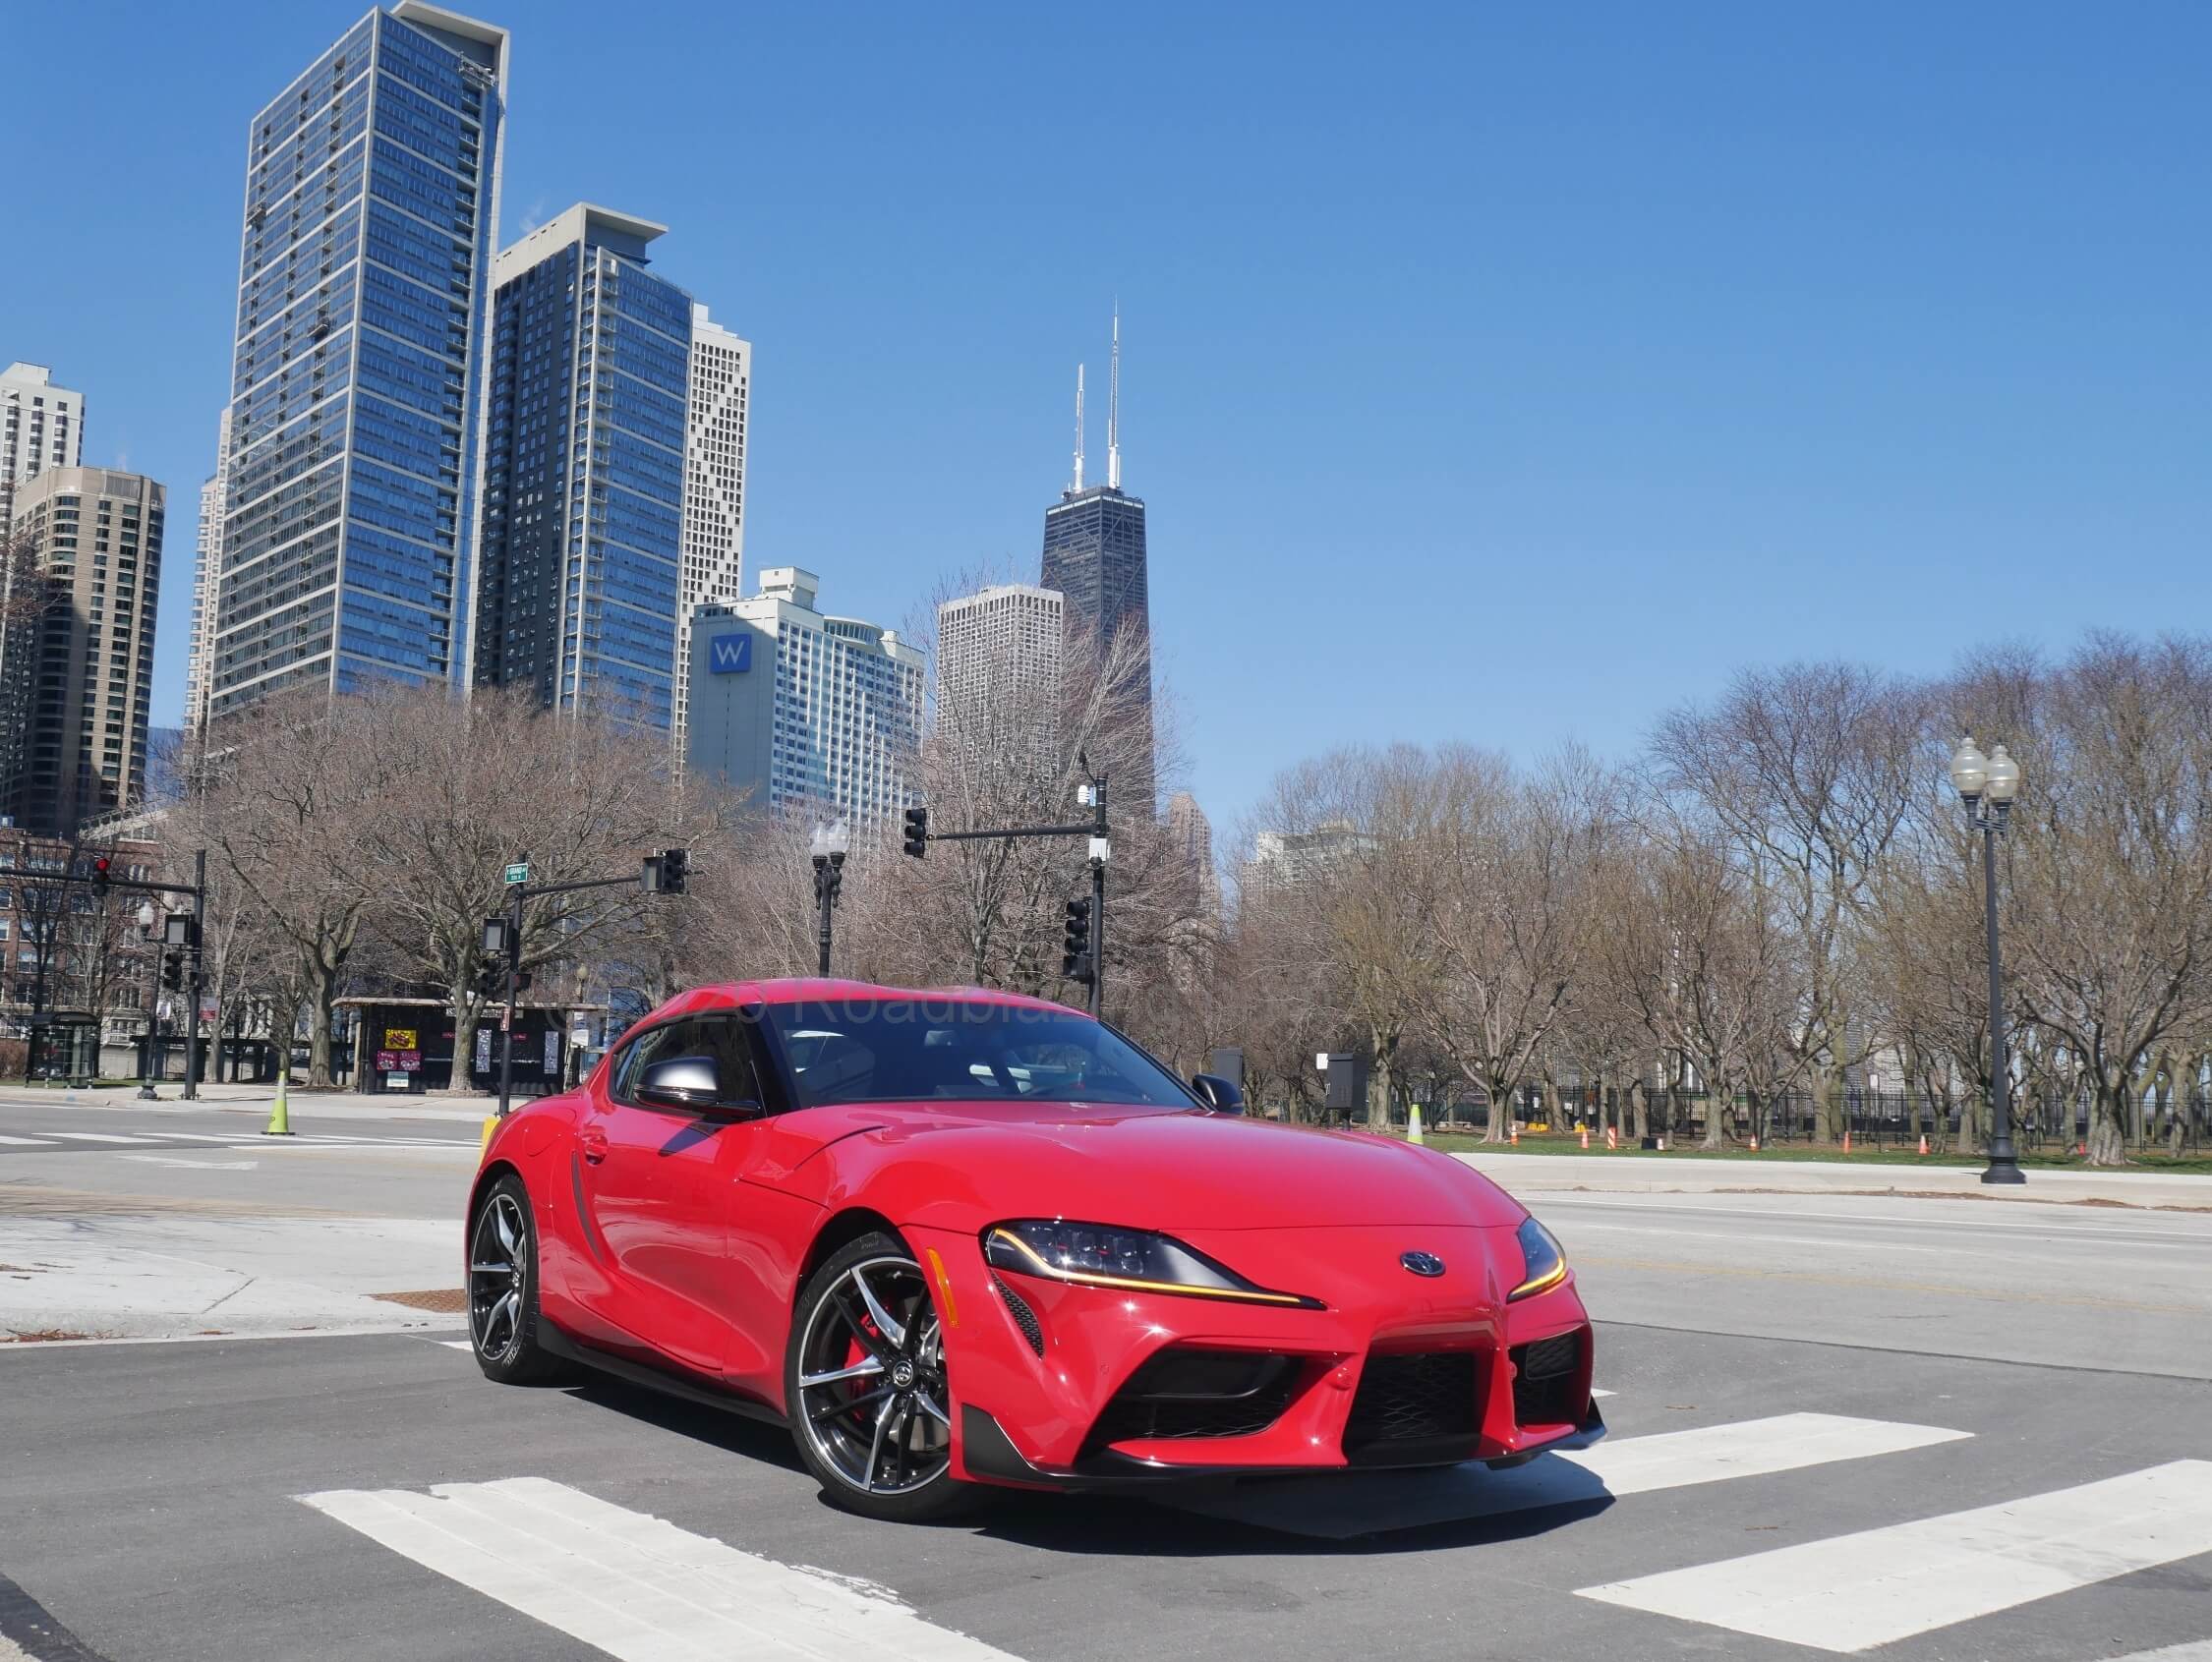 2020 Toyota Supra GR 3.0T Premium: visiting Chicago's Streeterville skyline with John Hancock hi-rise in background during COVID-19 home sheltering